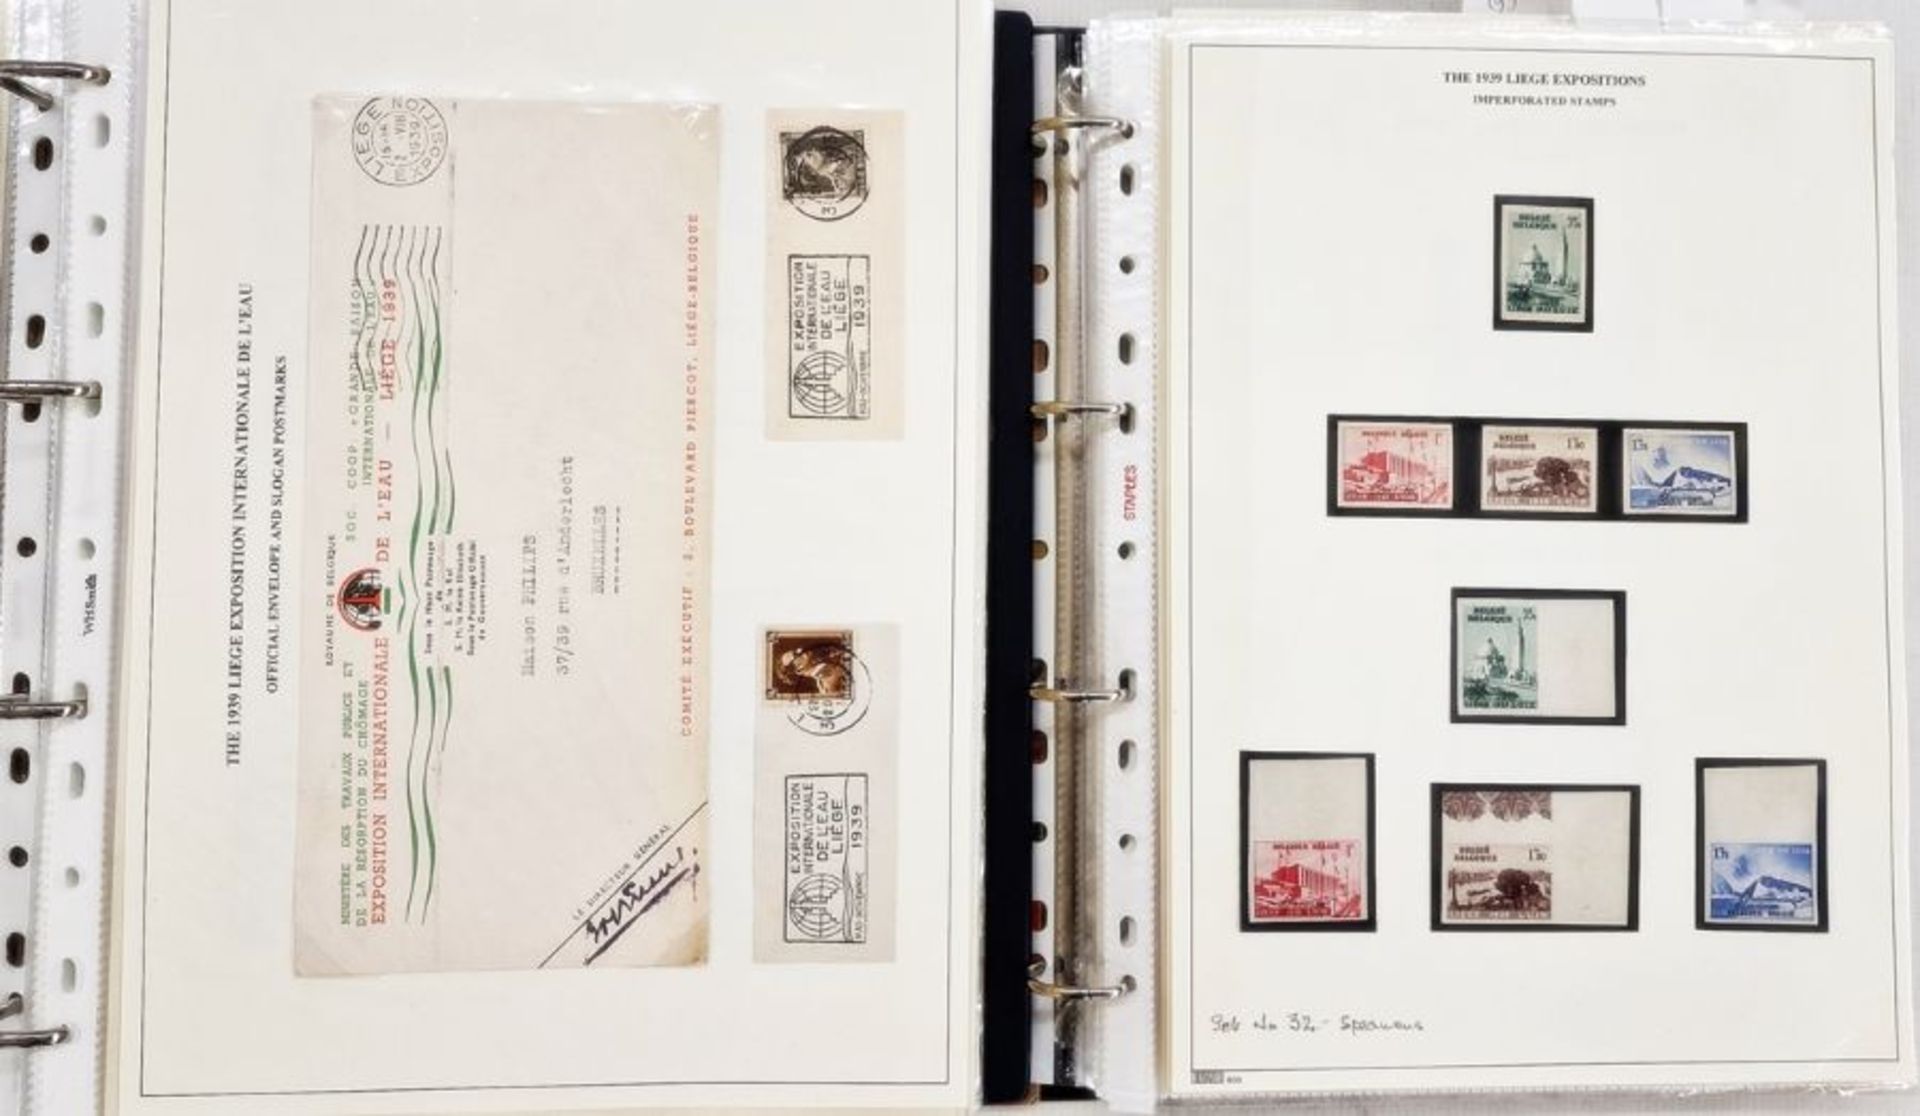 Belgium: Liege World Fair Exposition 1939 collection including mint and used definitives and - Image 2 of 14